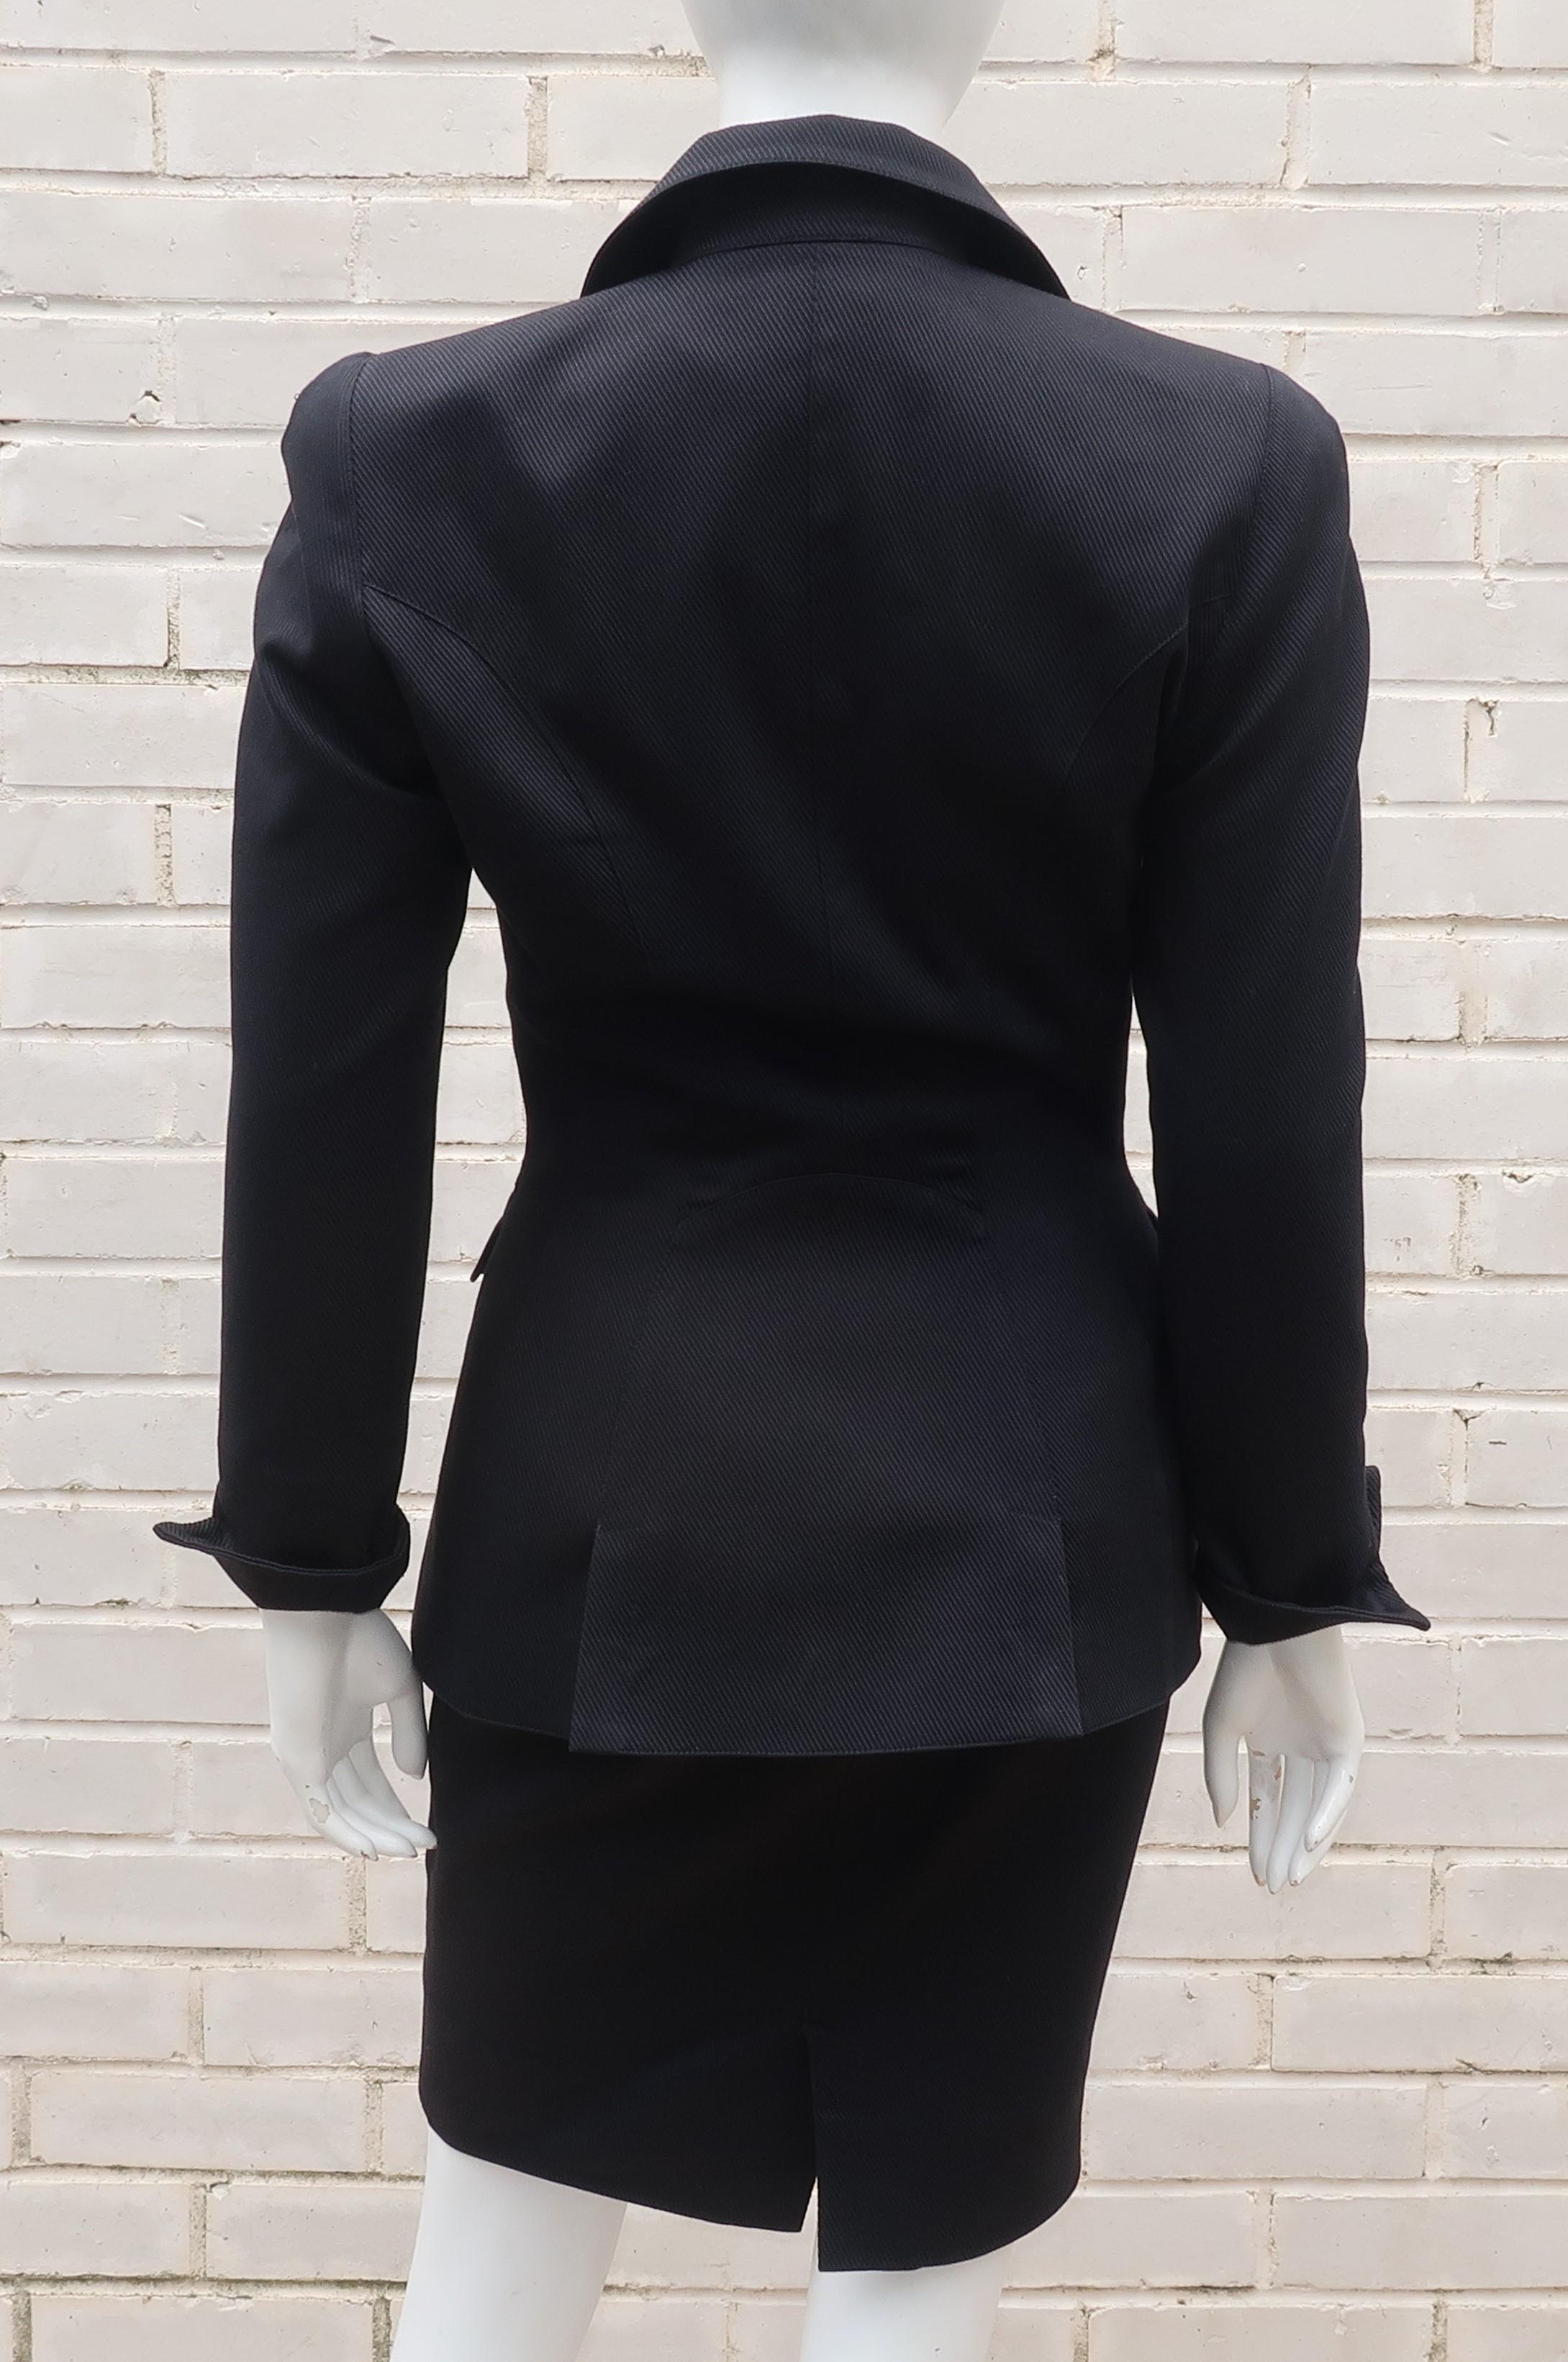 Men's Thierry Mugler Black Ribbed Cotton Skirt Suit, 1990's